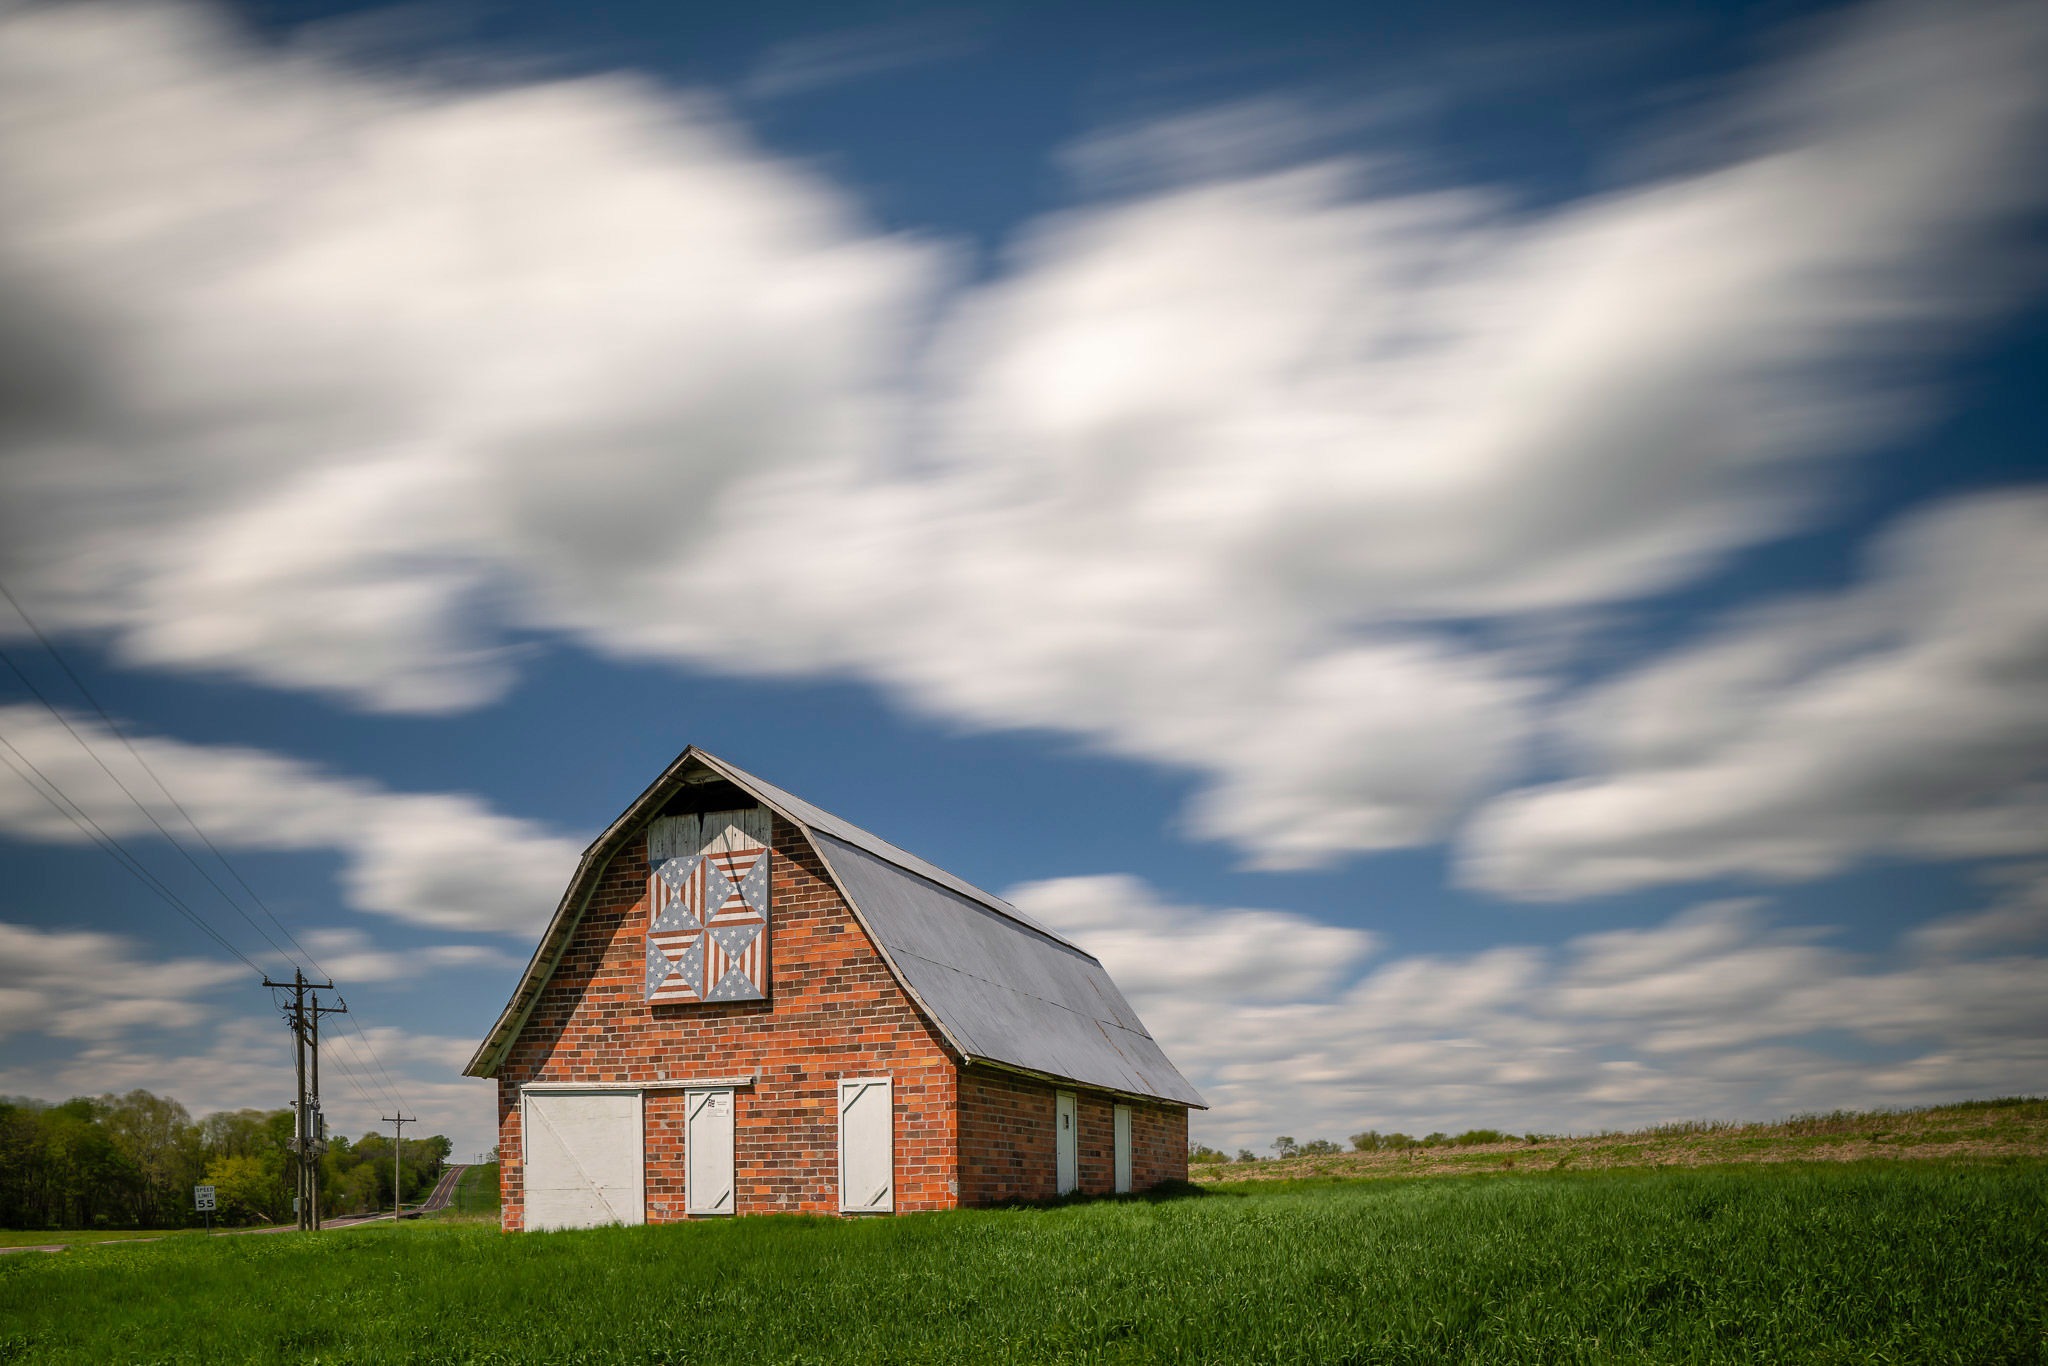 A photograph of a quilt motif on a barn with moving clouds above.